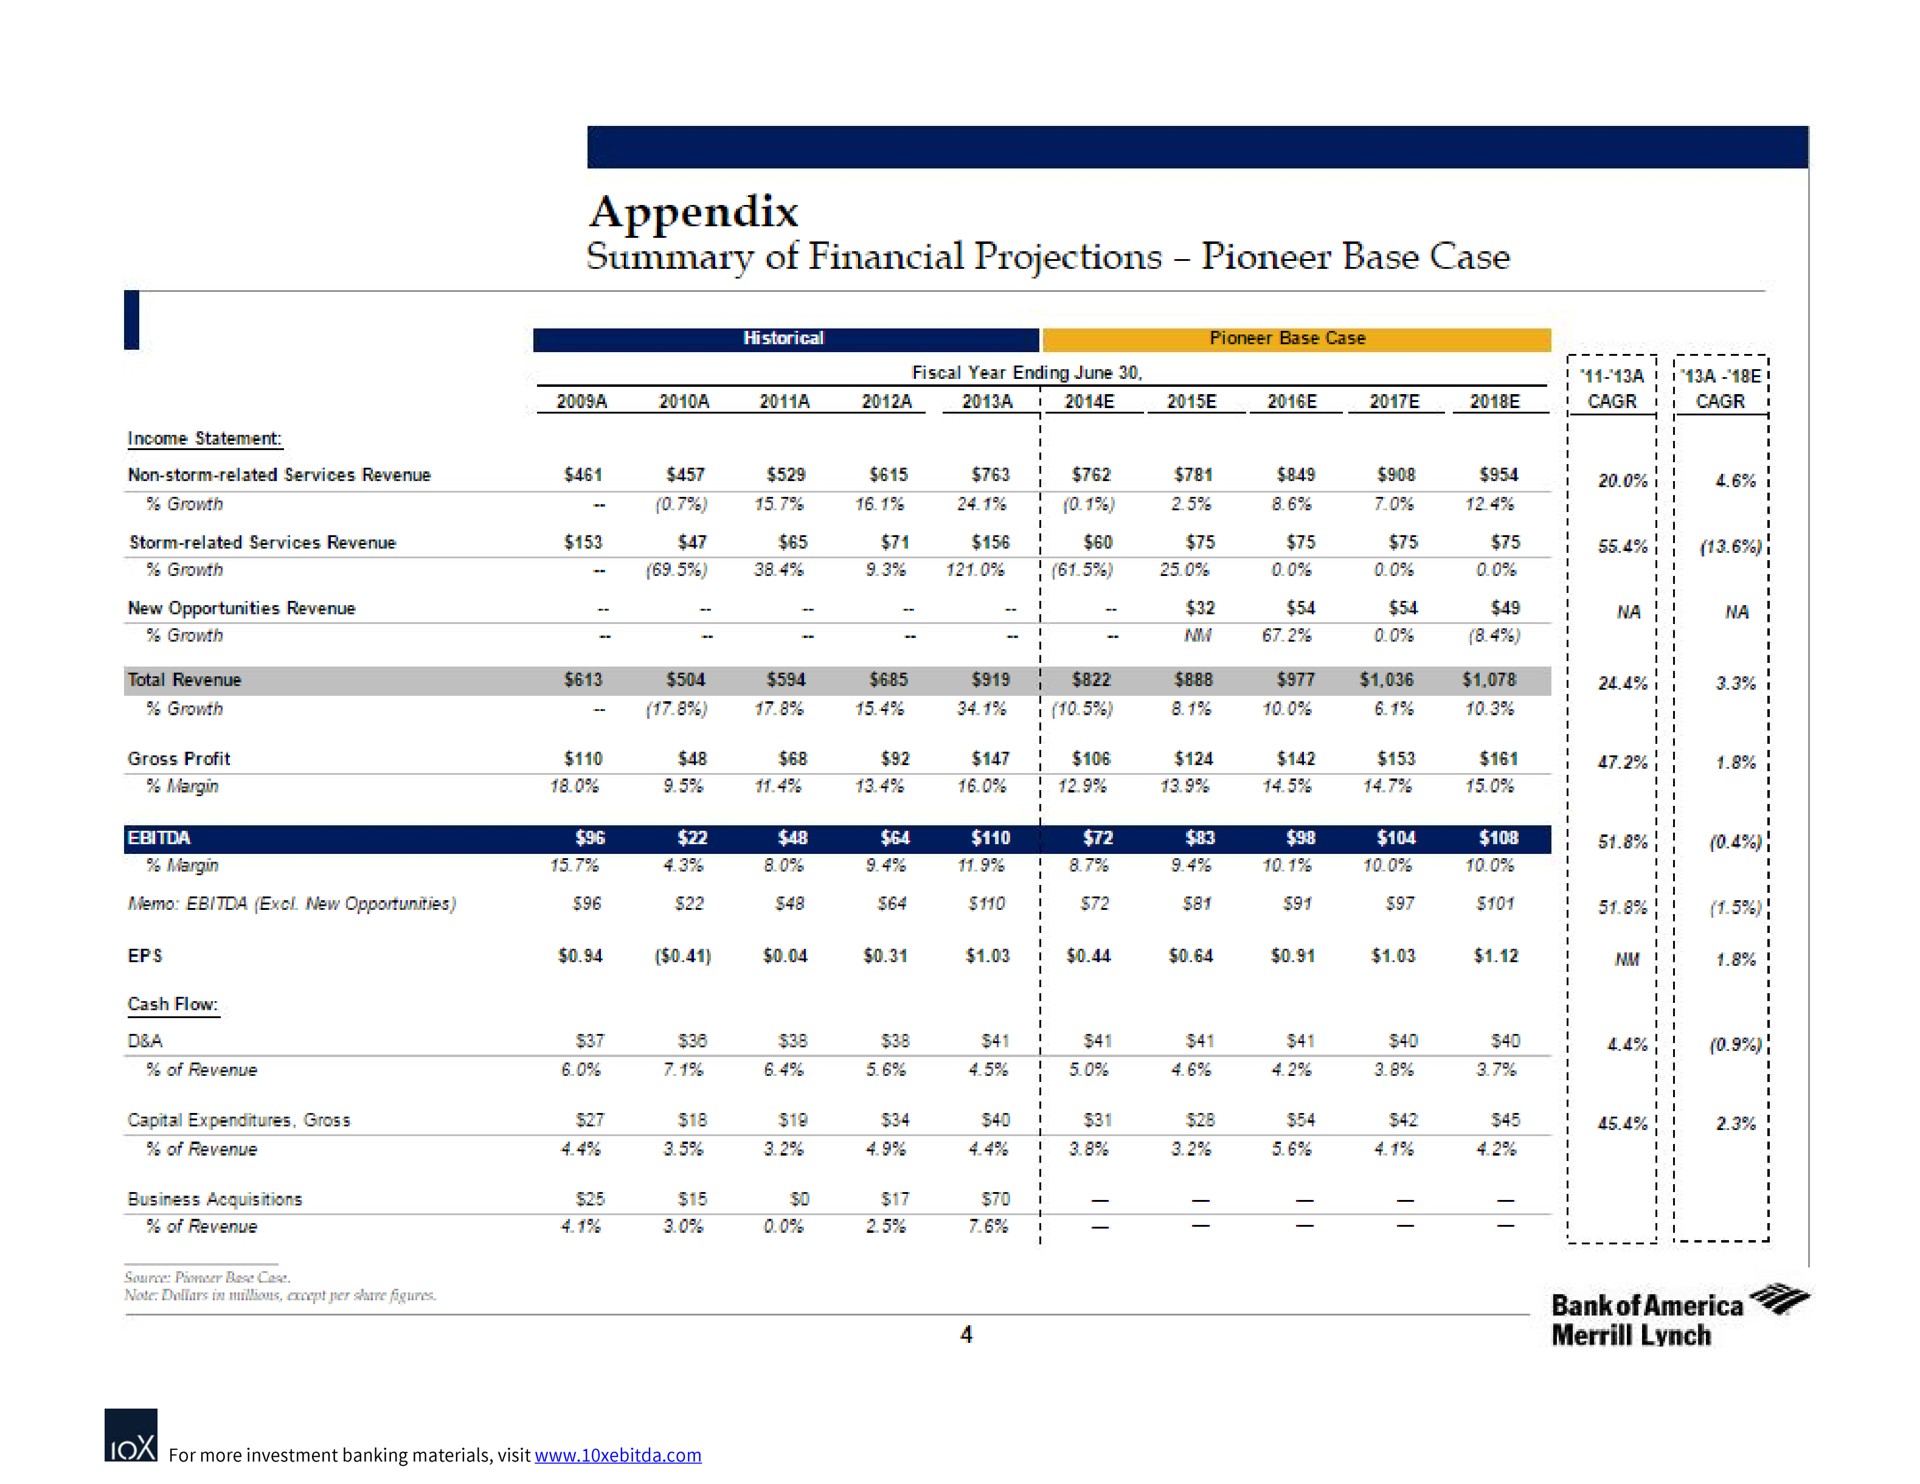 growth growth note in per appendix summary of financial projections pioneer base case pioneer base case fiscal year ending june a a sie lynch room | Bank of America